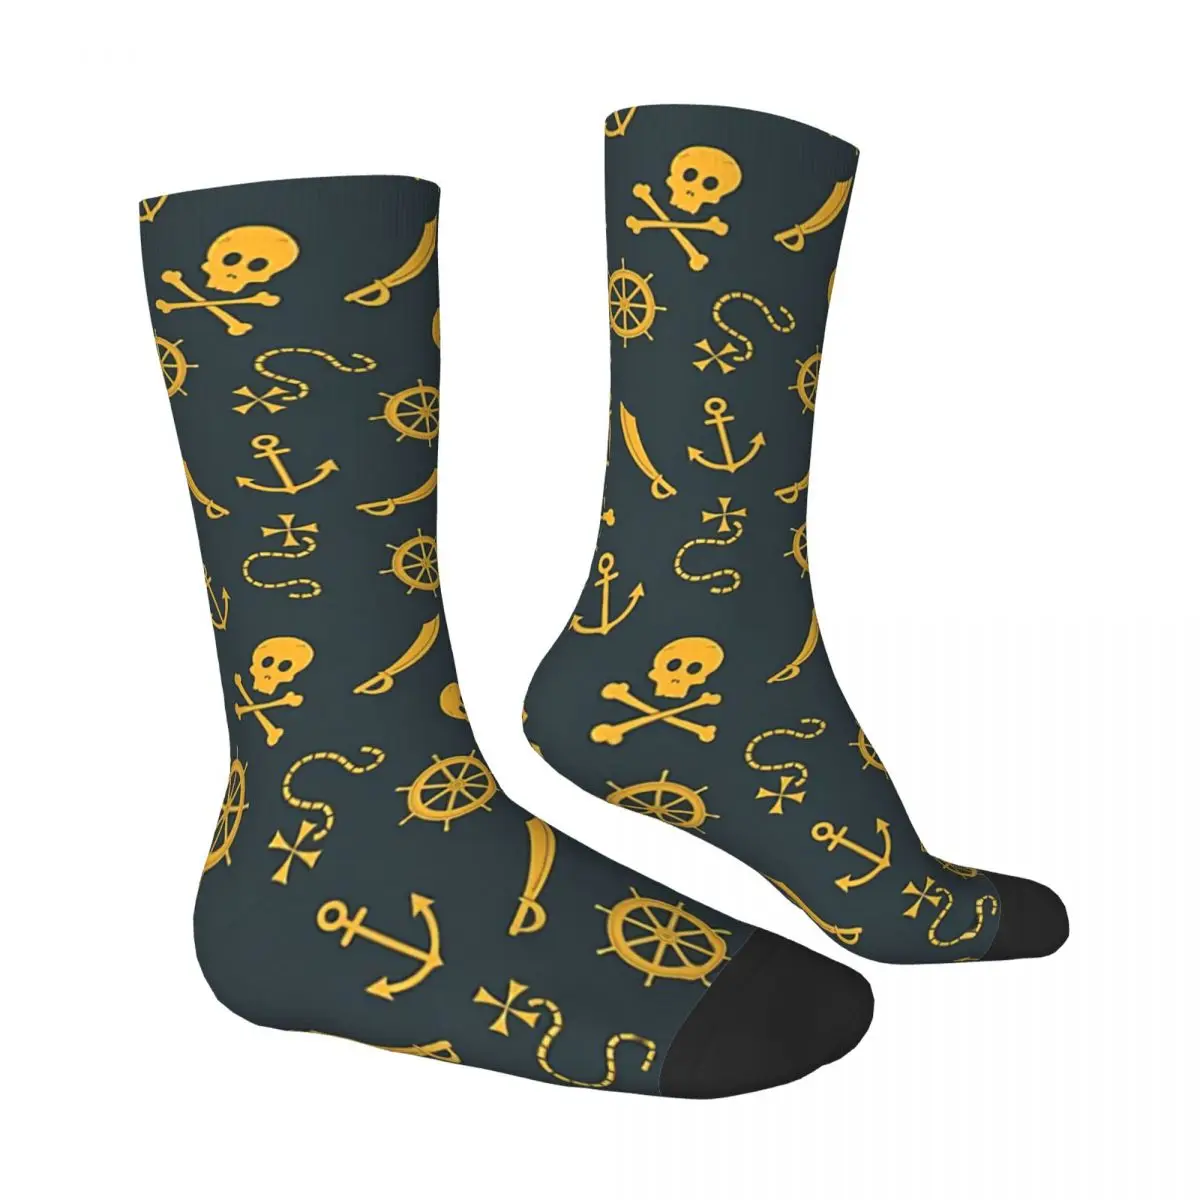 Pirate Pattern stockings Thickened thermal stockings Men's and women's stockings, For Unisex